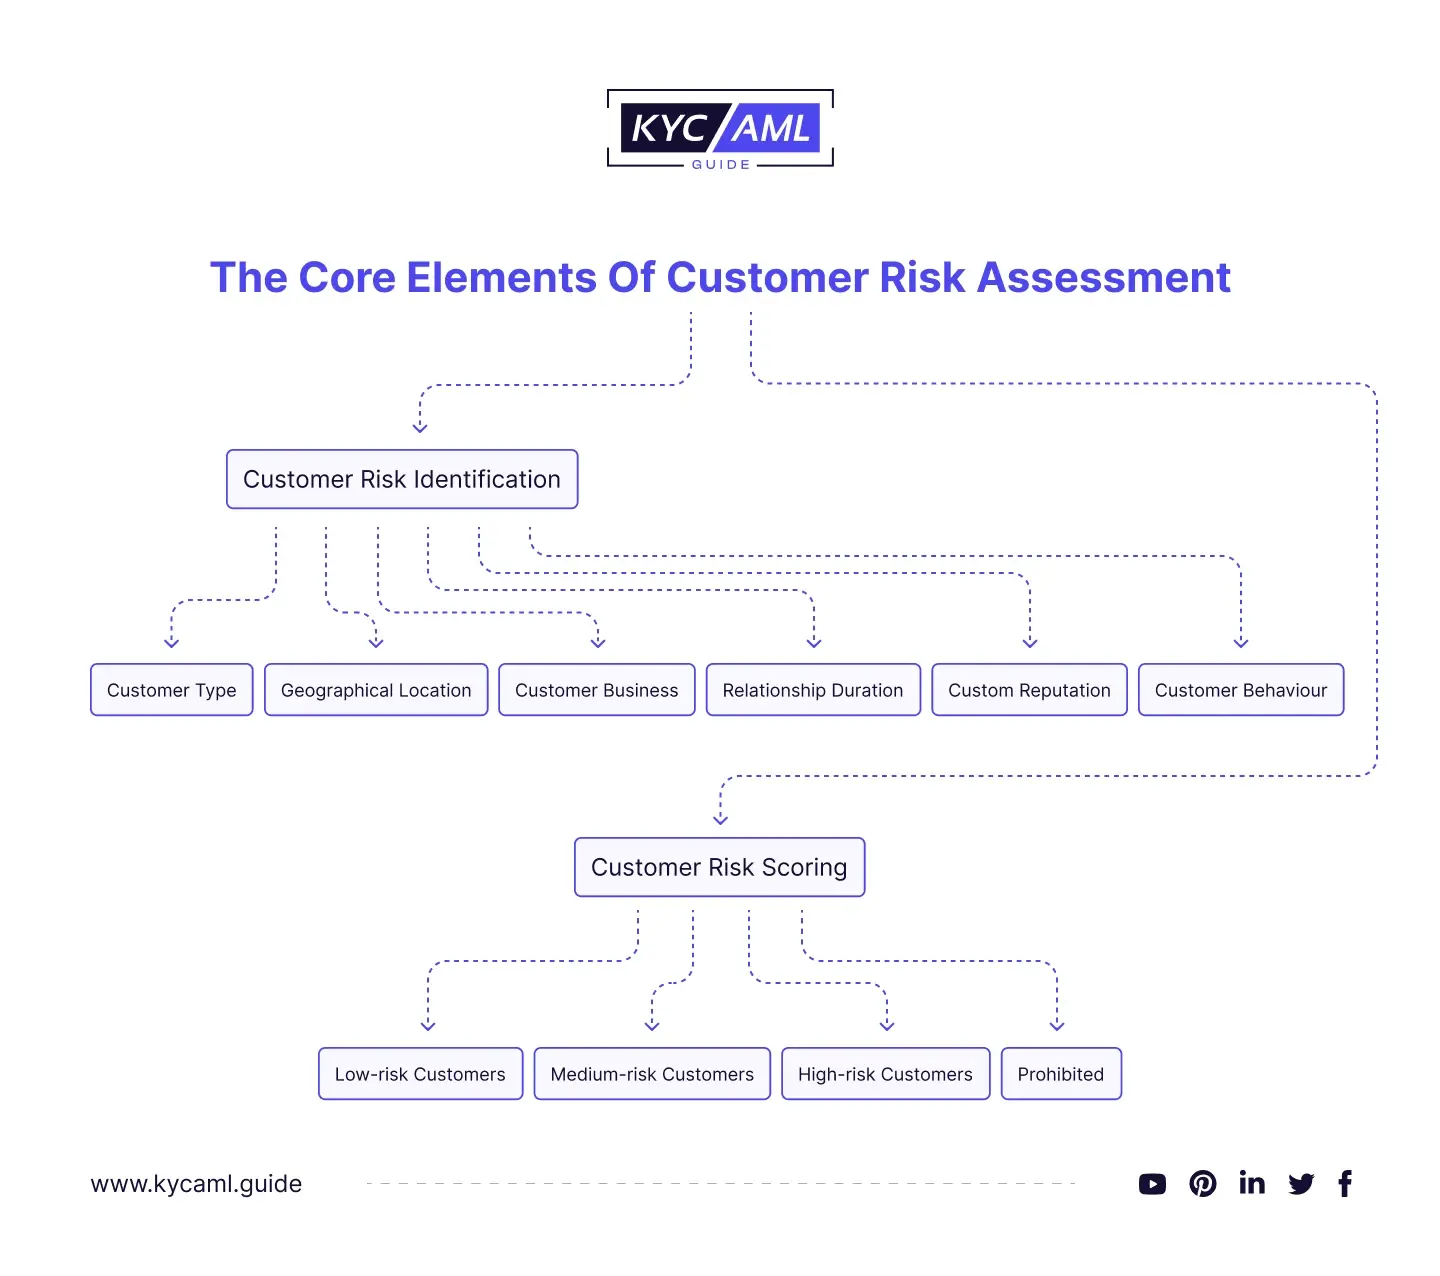 The Core Elements of Customer Risk Assessment